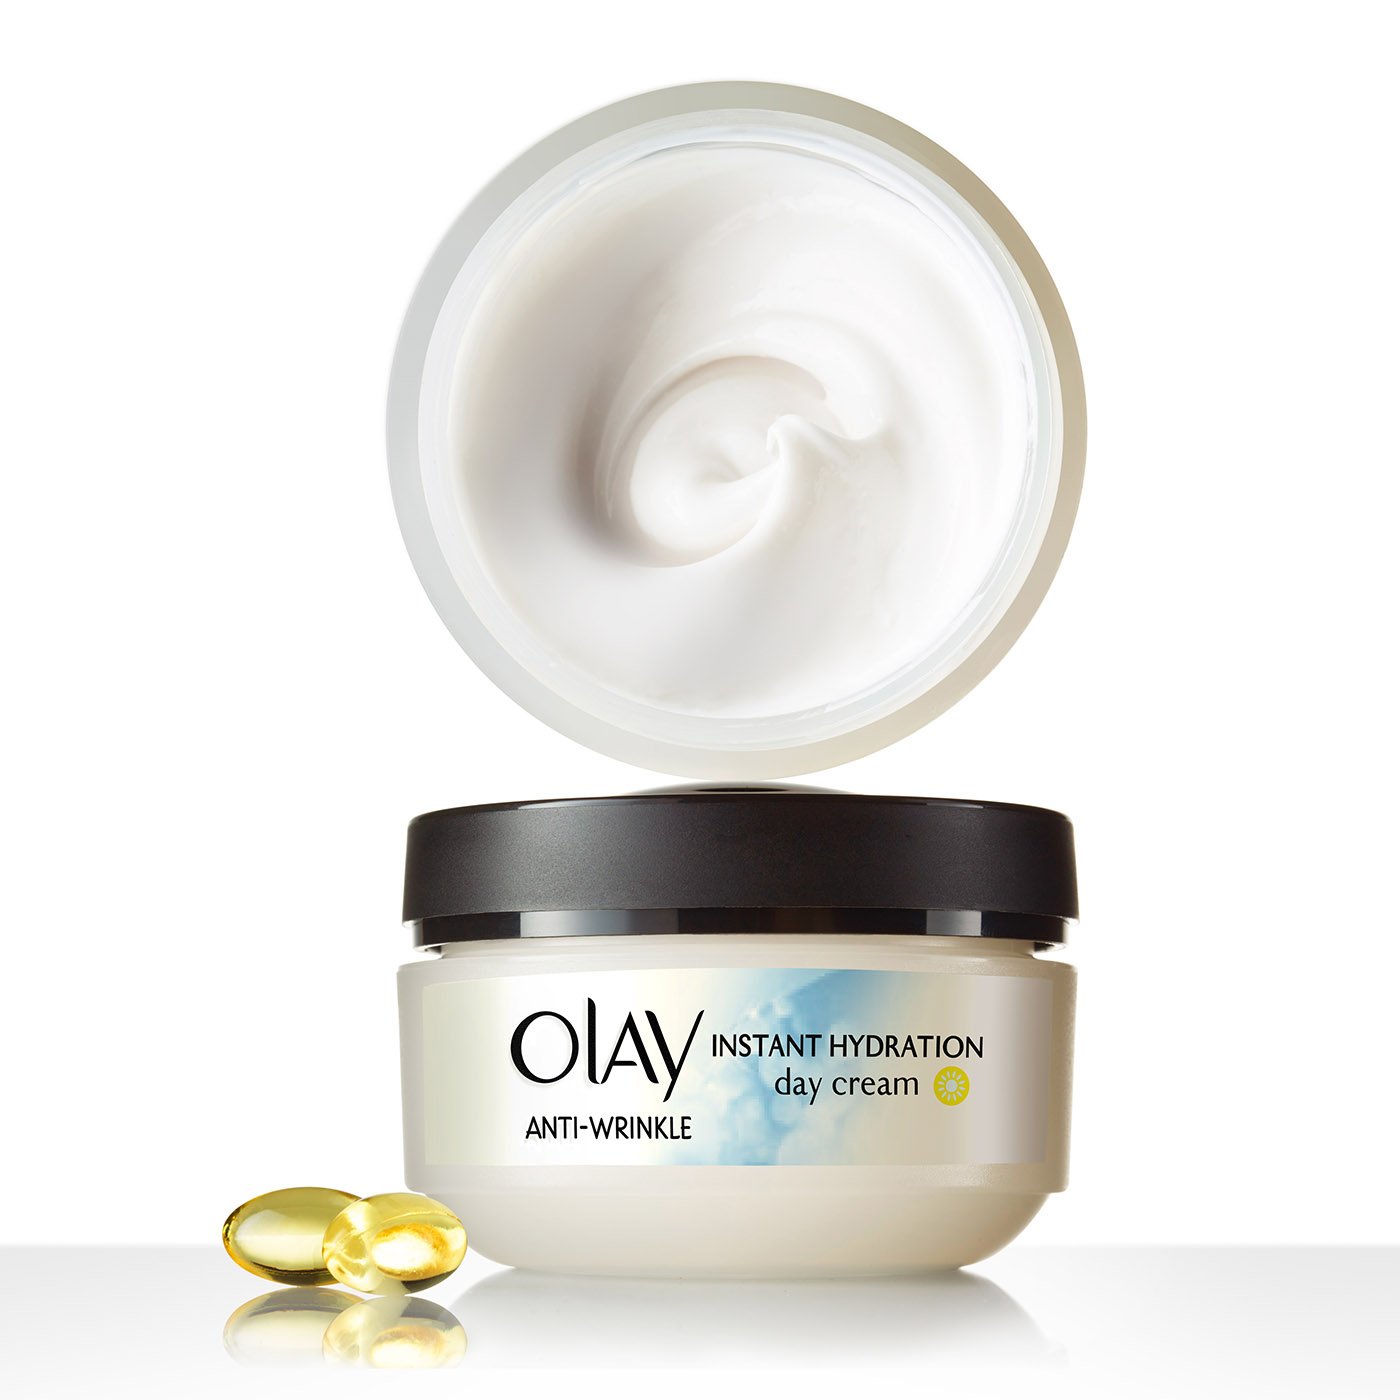  Olay product photographed for Saatchi and Saatchi to be used on Instagram by David Rowland 